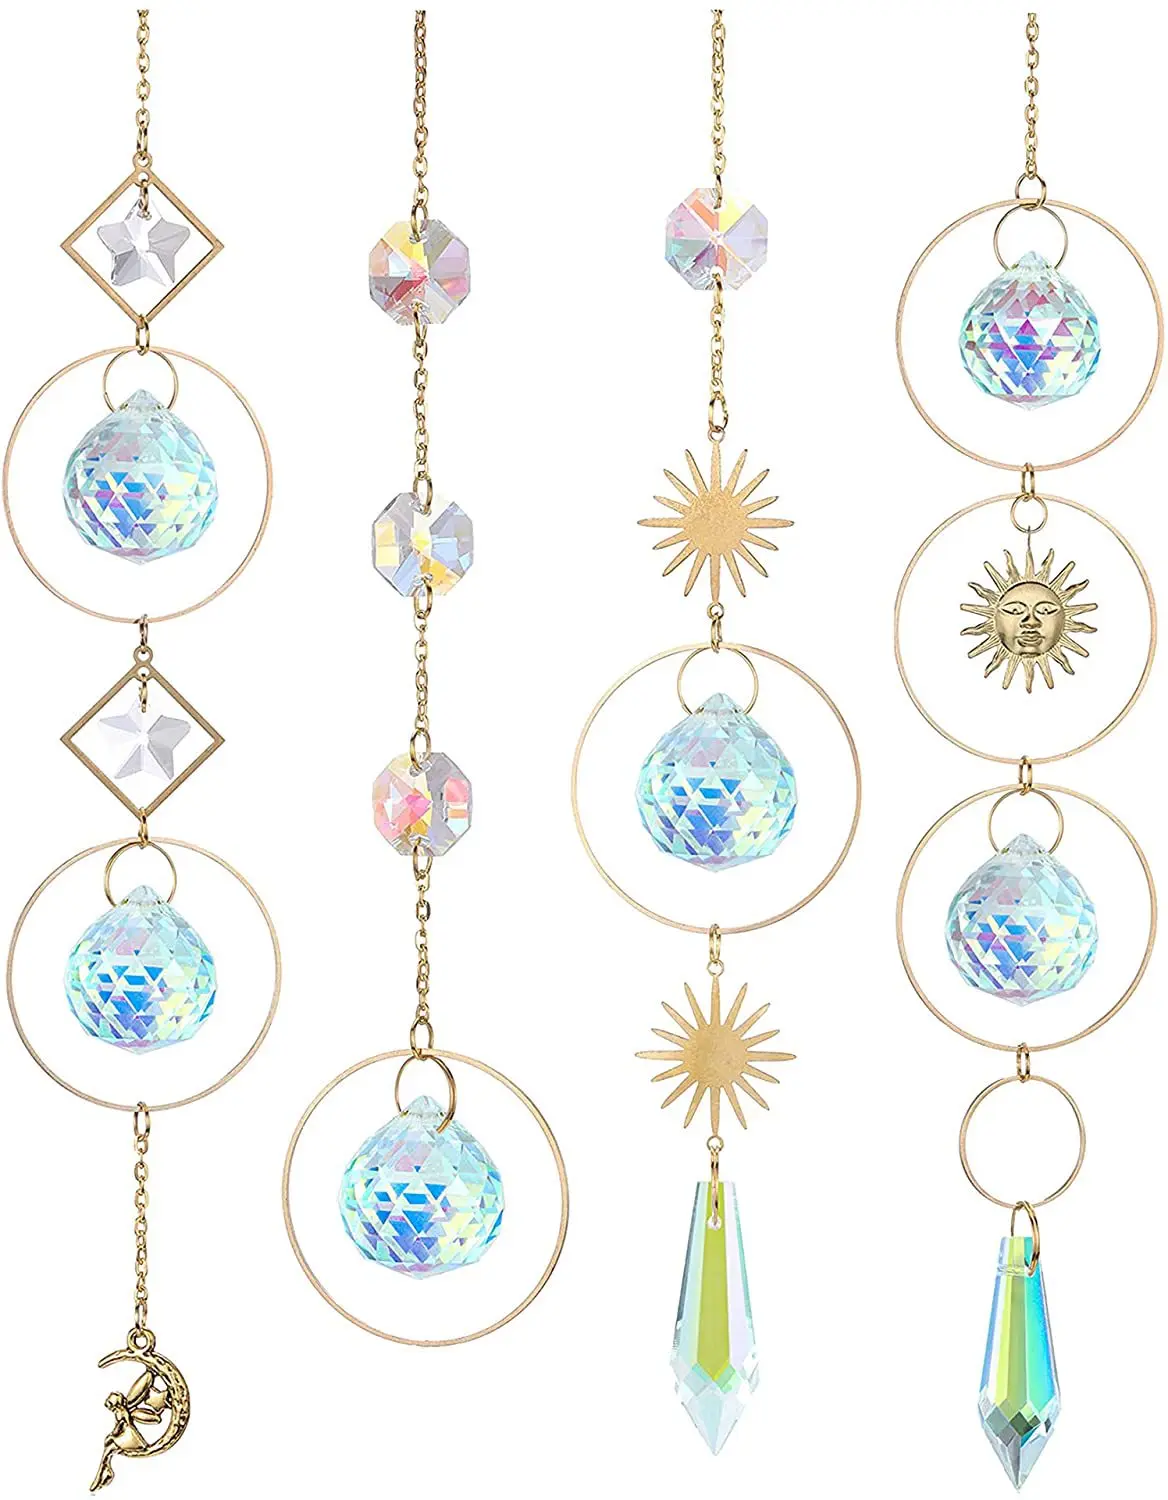 Hanging Crystal for Sun Catcher with Prism Glass Crystal Ball Light Suncatcher Rainbow Maker Hanging Window Crystals Decoration